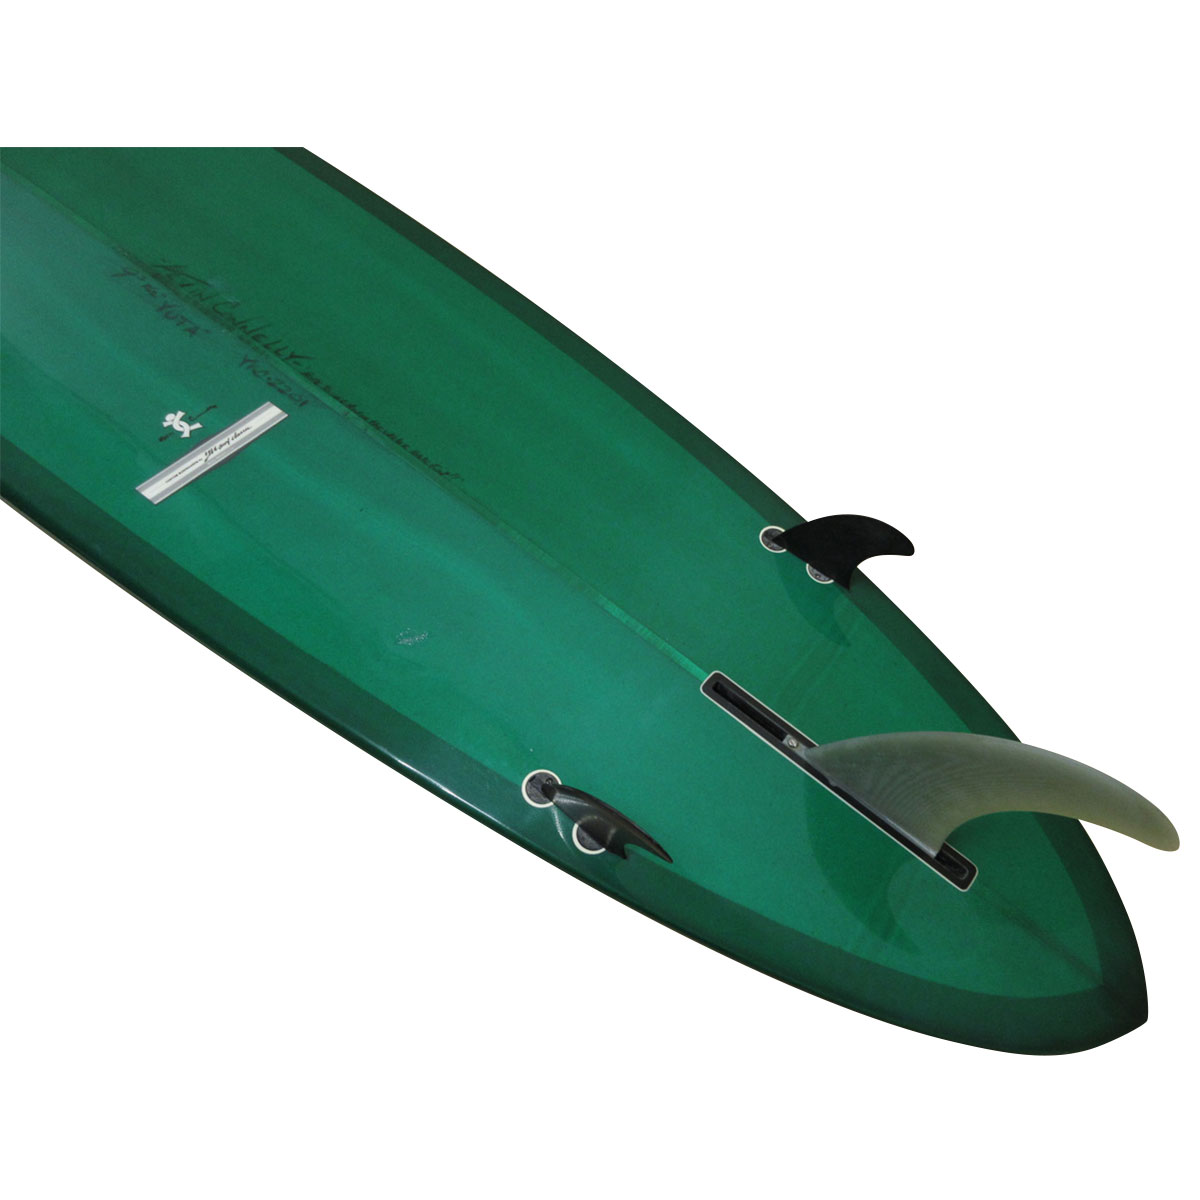 YU SURF CLASSIC / HP Noserider 9`3 Shaped by KEVIN CONNELLY